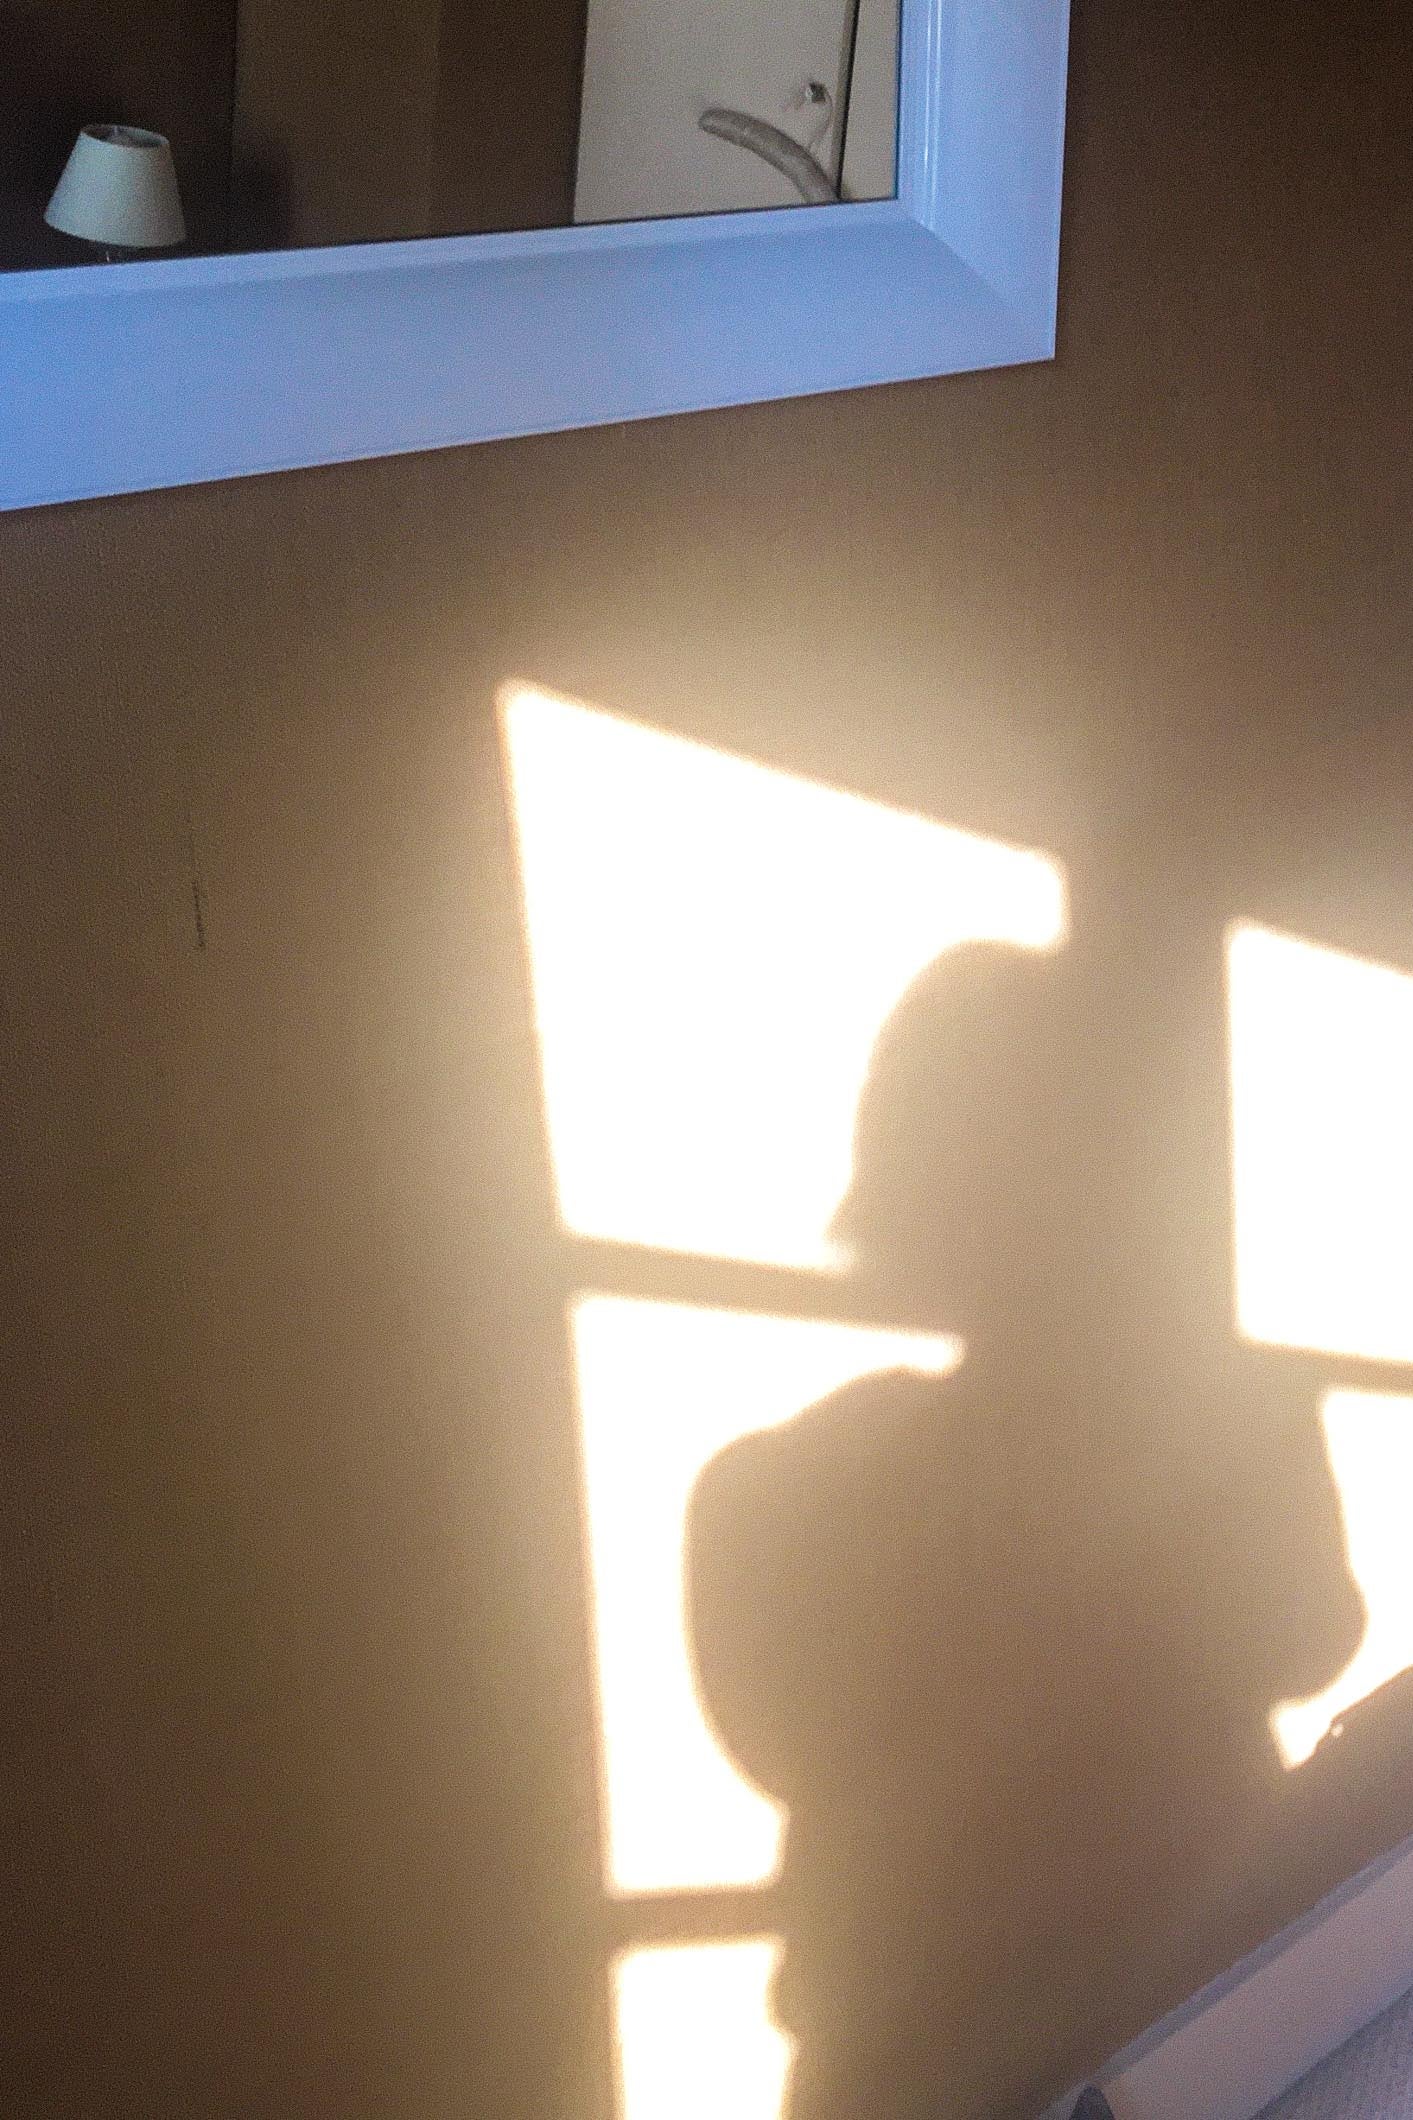 A silhouette of a person created by a sunlit window.